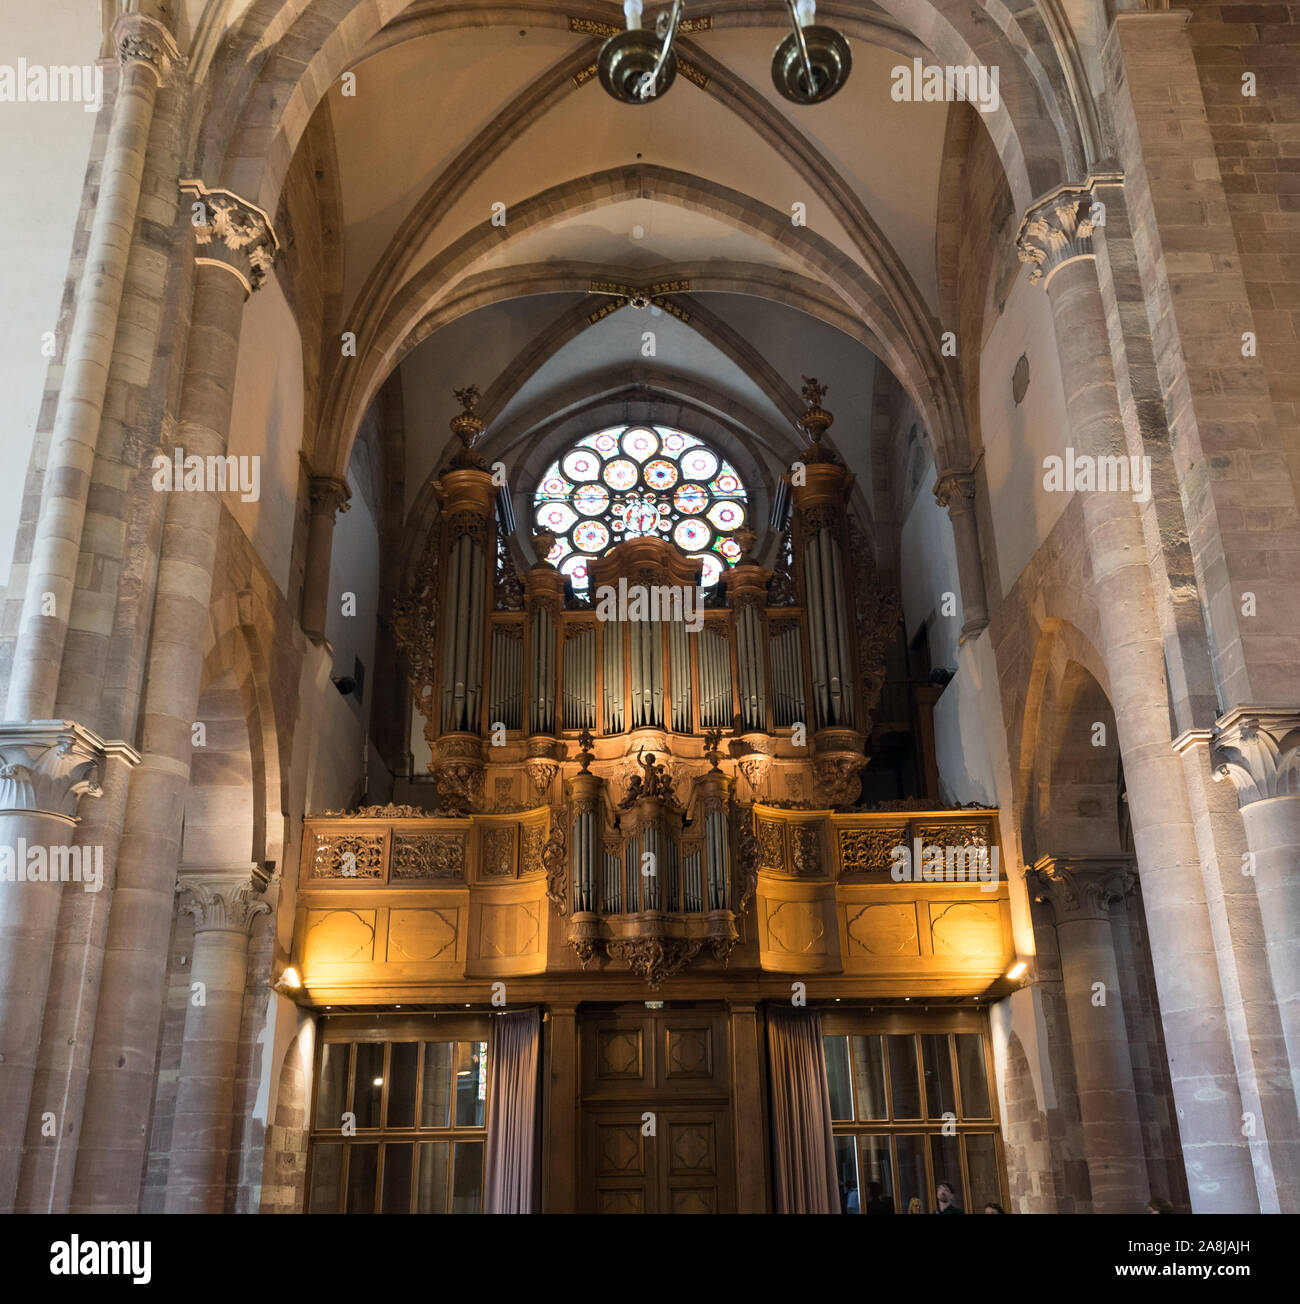 Strasbourg, Bas-Rhin / France - 10 August 2019: interior view of the Saint Thomas' Church in Strasbourg with the organ Stock Photo